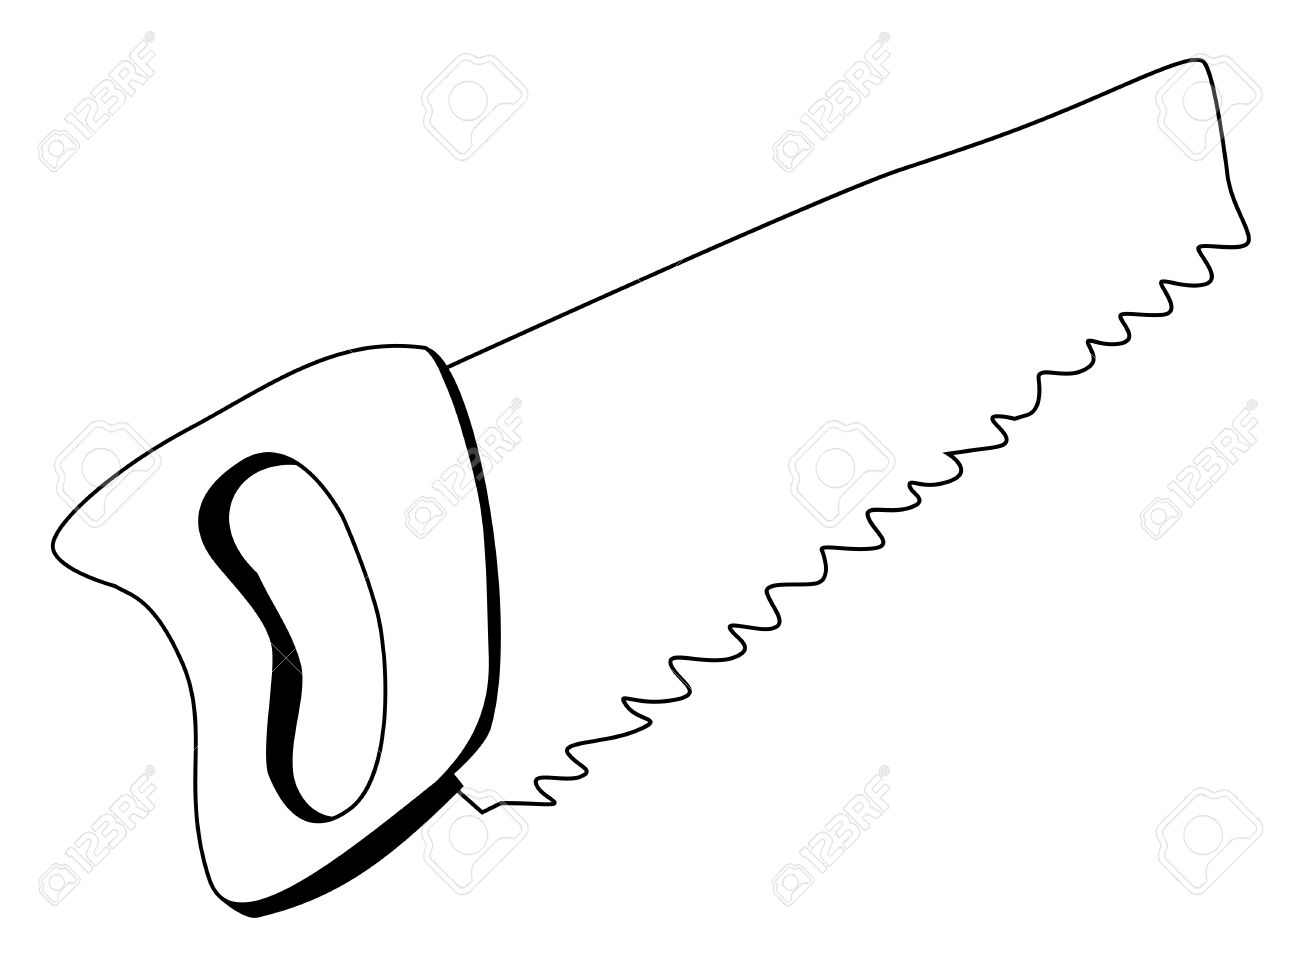 Download PNG image - Hand Saw